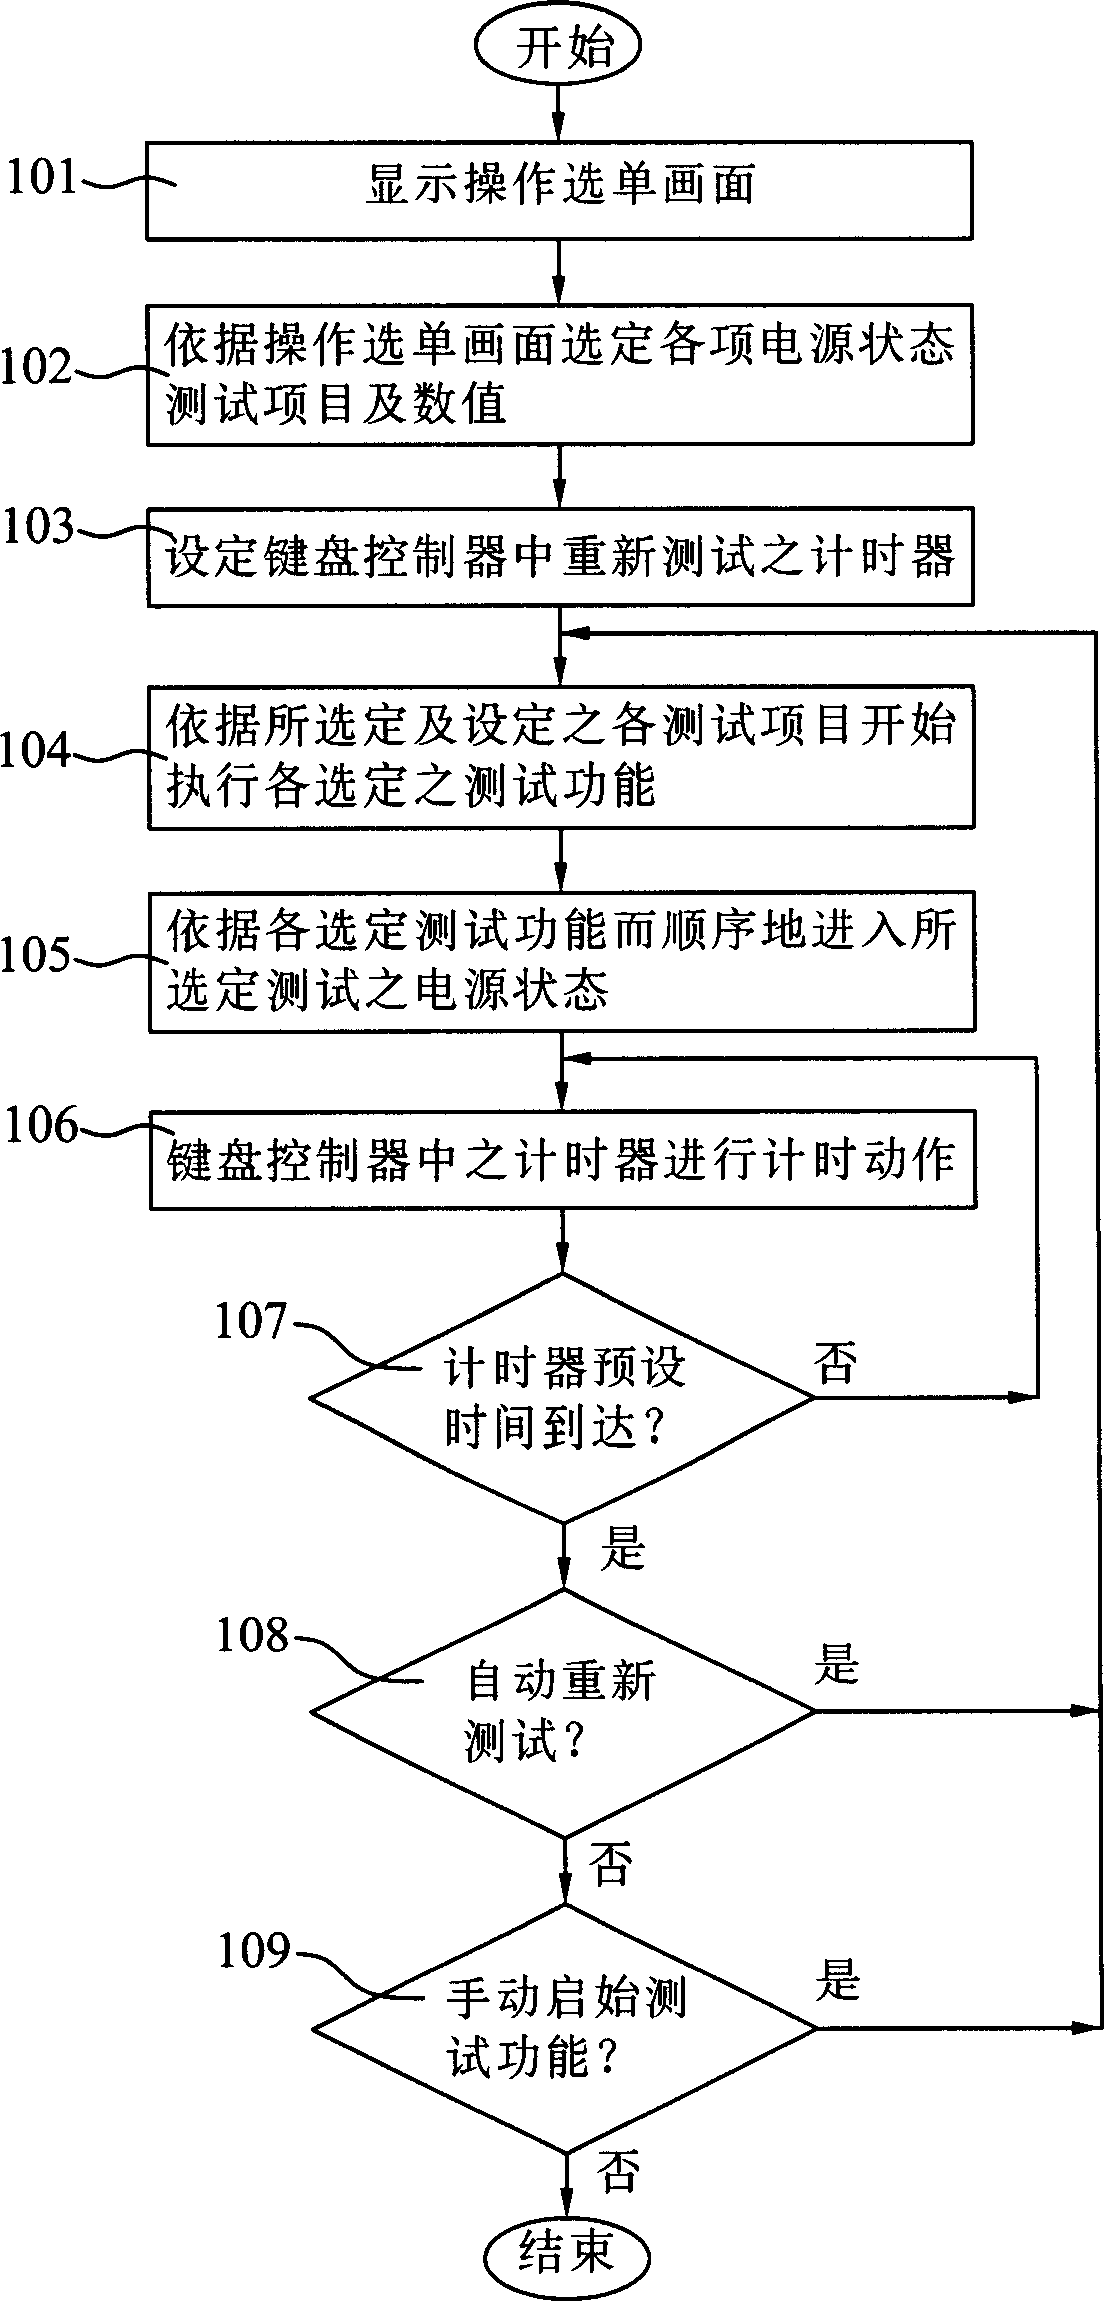 Power supply status automatic test method for computer apparatus